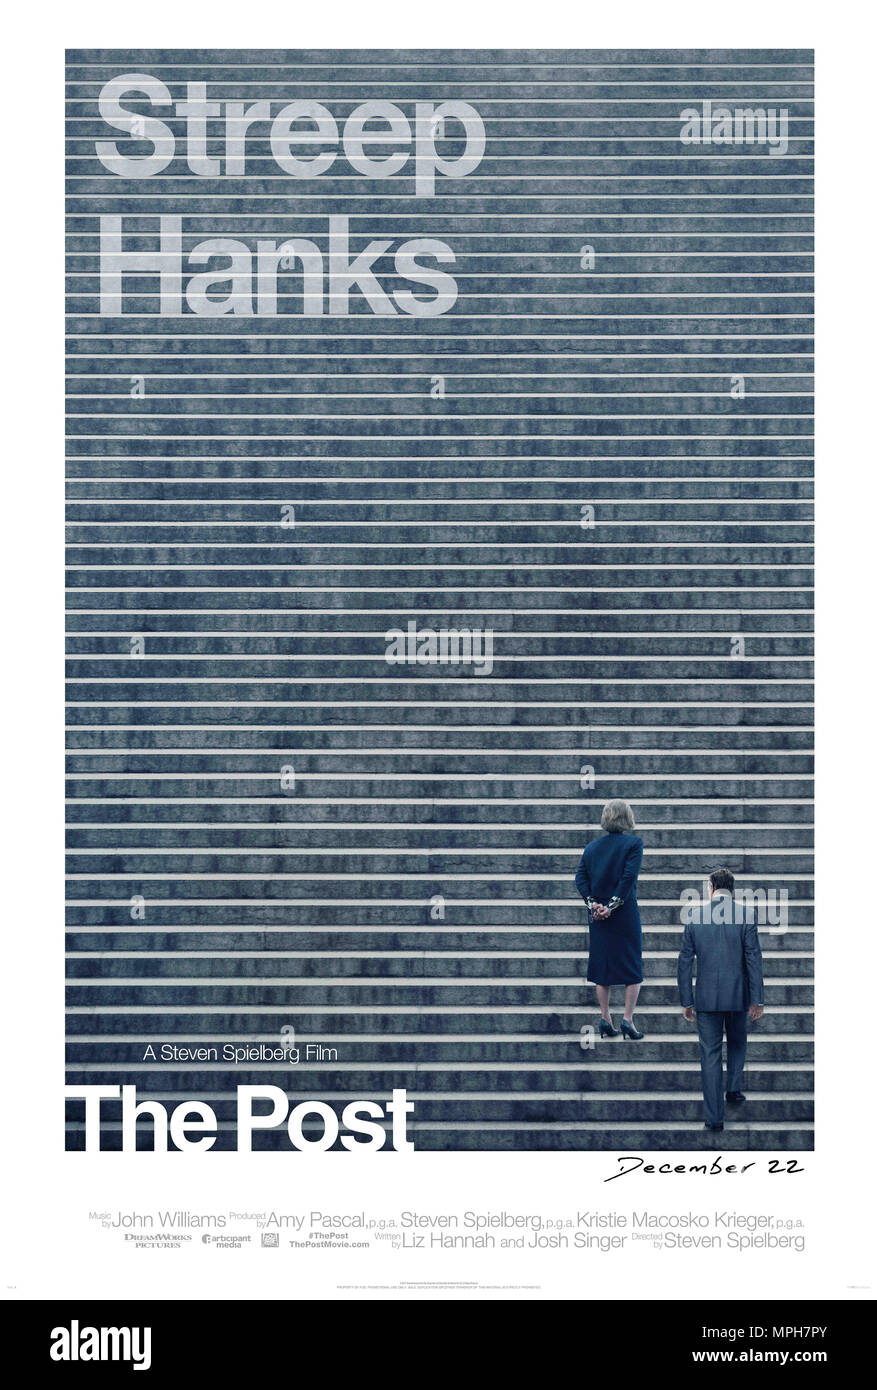 RELEASE DATE: January 12, 2018 TITLE: The Post STUDIO: Twentieth Century Fox DIRECTOR: Steven Spielberg PLOT: A cover-up that spanned four U.S. Presidents pushed the country's first female newspaper publisher and a hard-driving editor to join an unprecedented battle between journalist and government. STARRING: TOM HANKS as Ben Bradlee, MERYL STREEP as Kay Graham. (Credit Image: © Twentieth Century Fox/Entertainment Pictures) Stock Photo